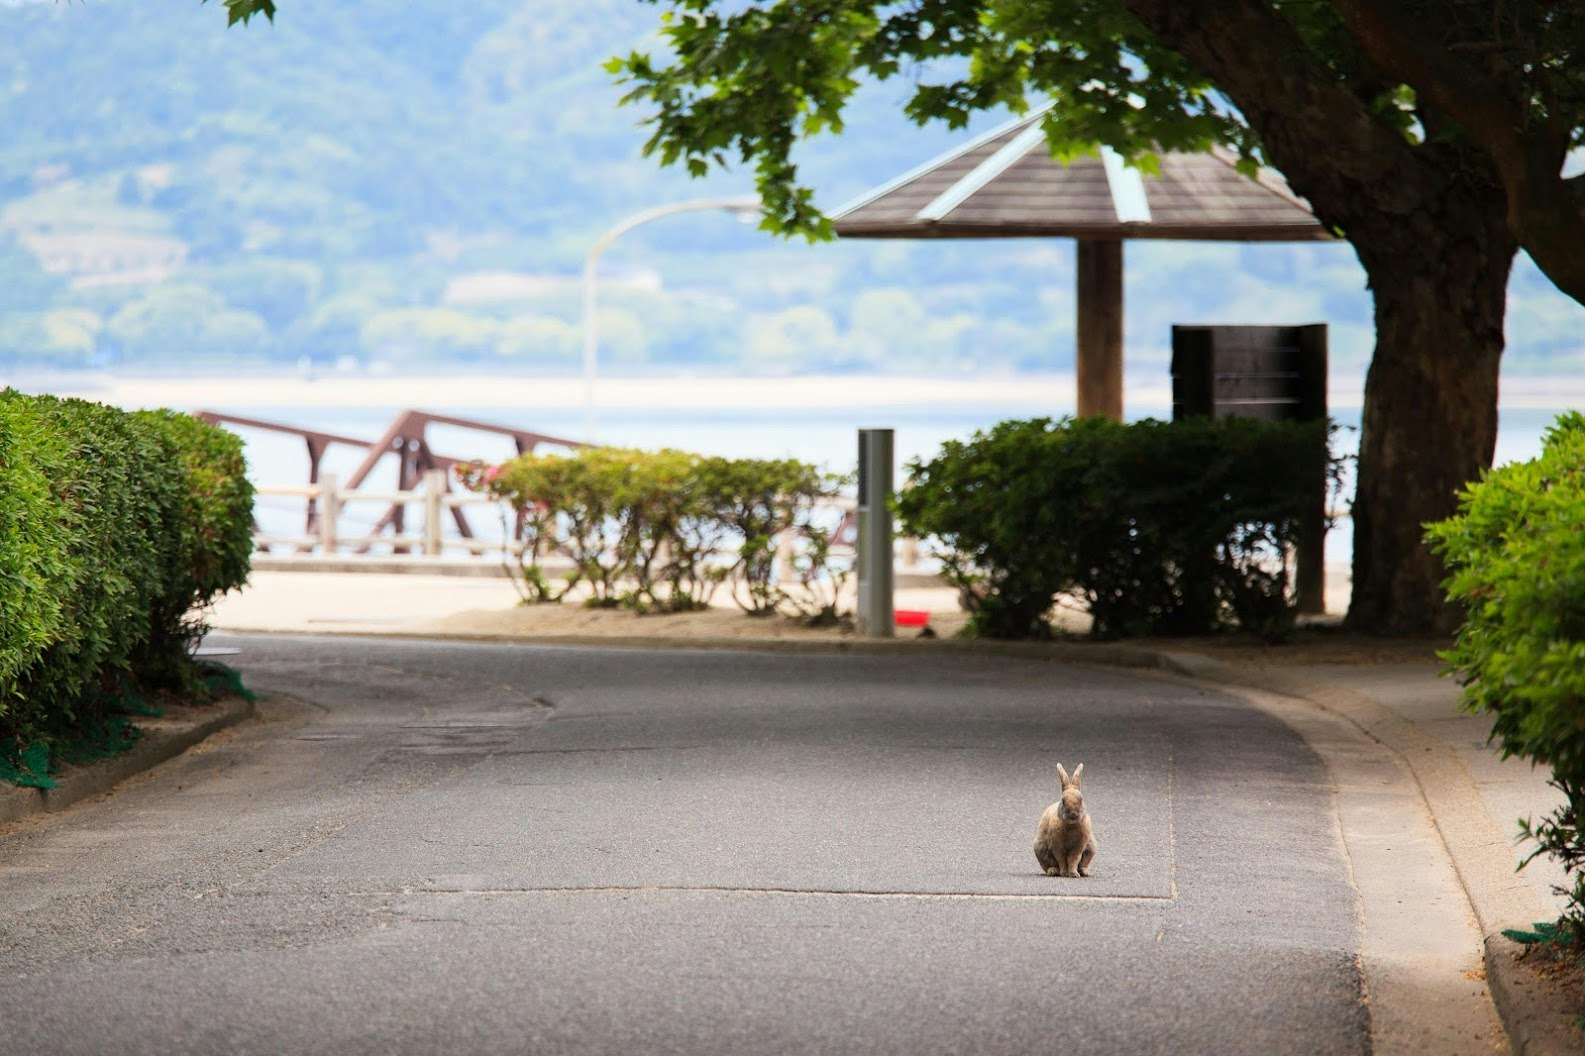 A rabbit sits very still on the island of Ōkunoshima in a curving road that leads to a dock by the shore and a small umbrella-like shelter made of wood and a small roof with asphalt shingles